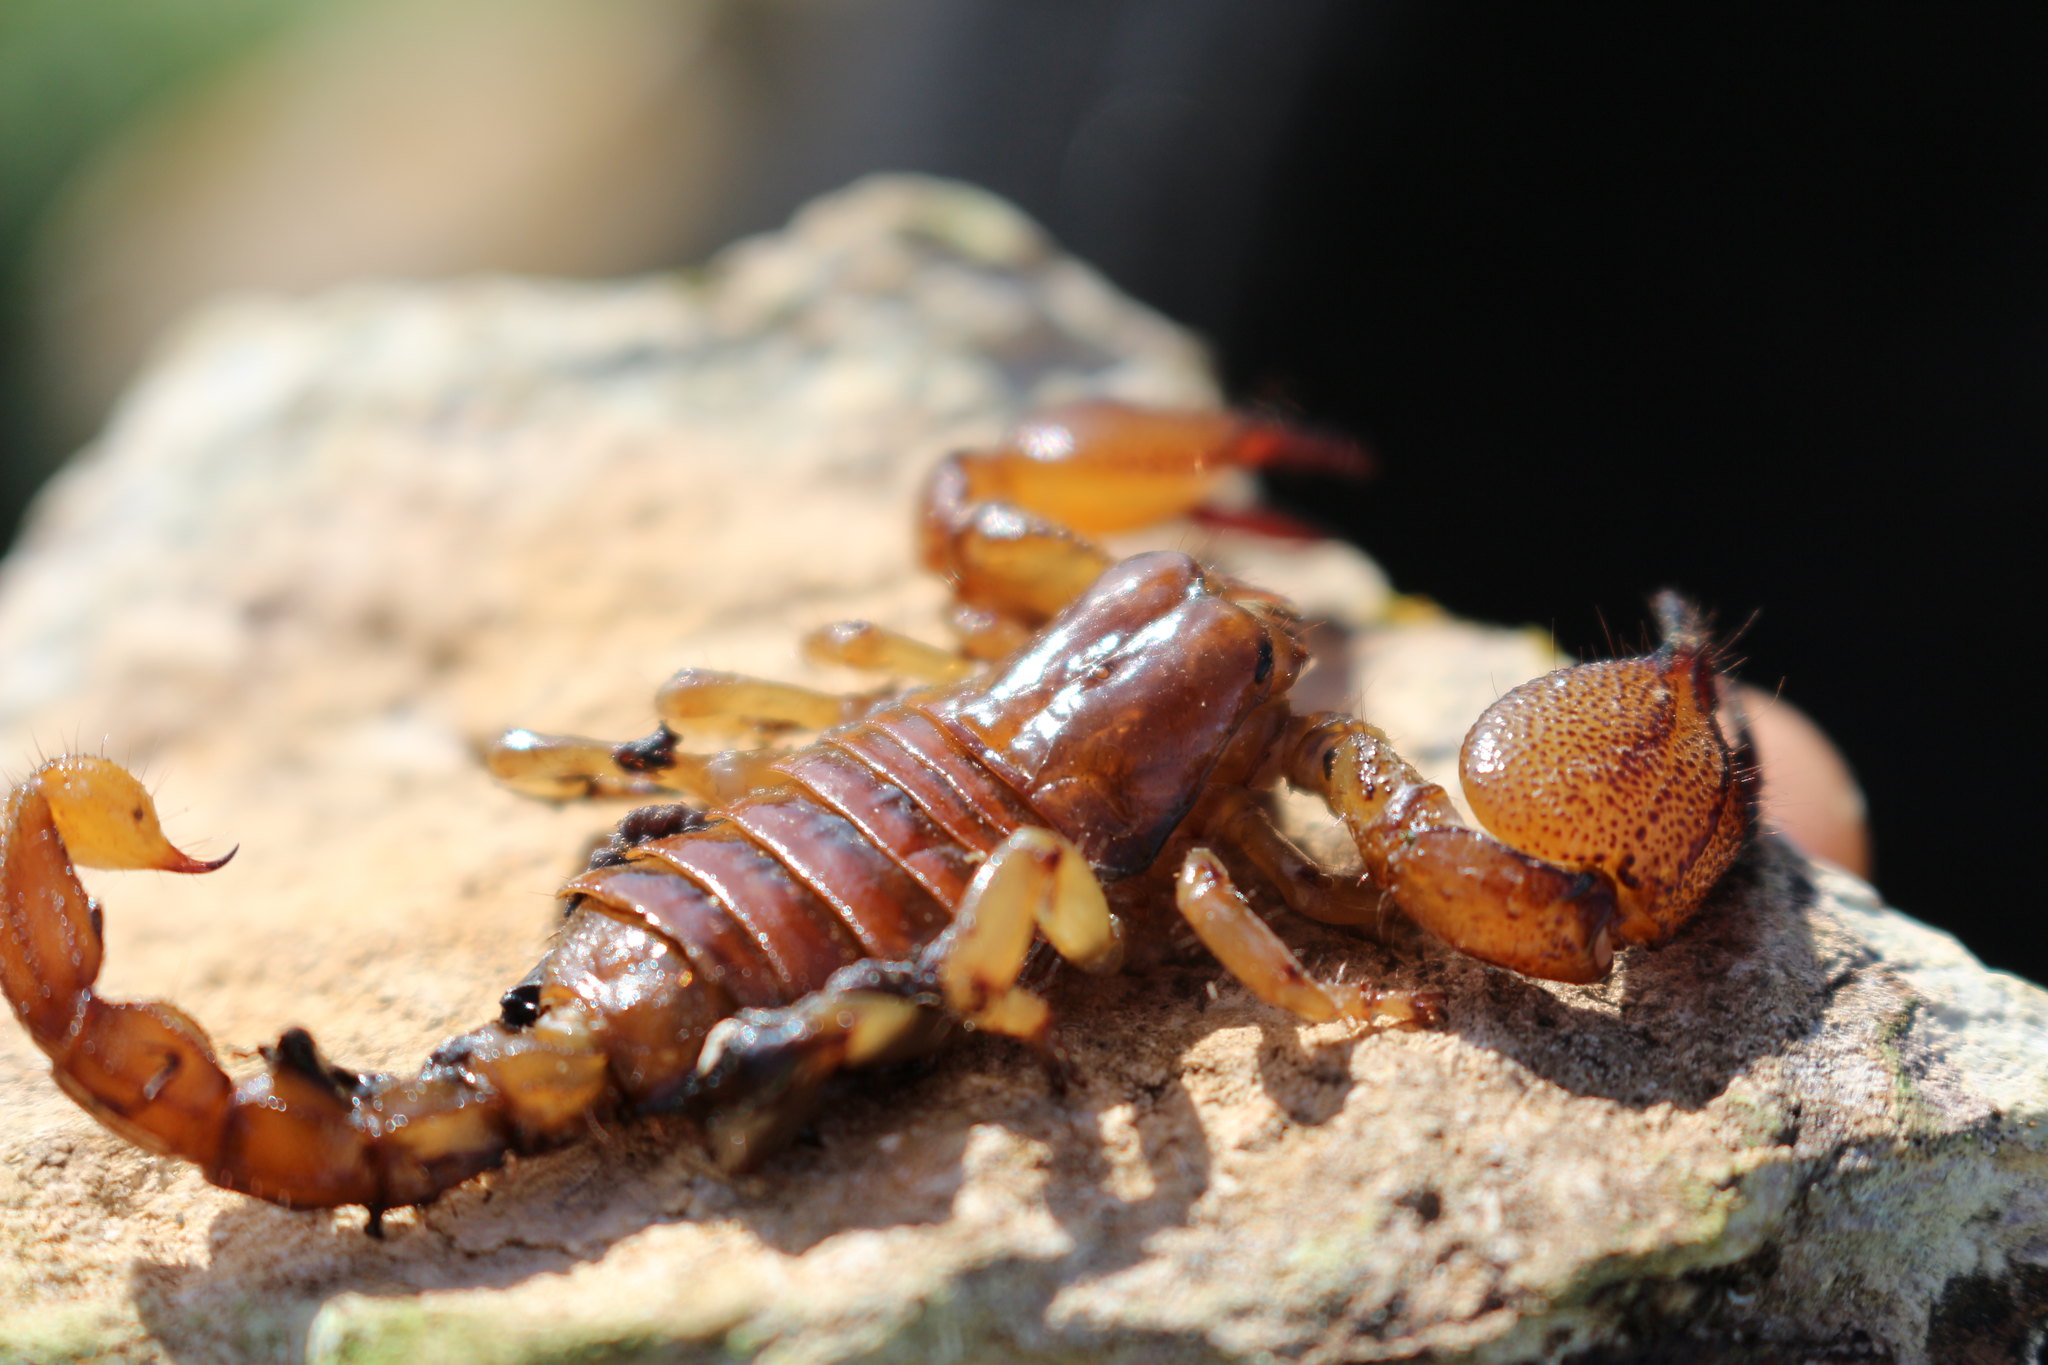 A photo of a forest scorpion on a rock